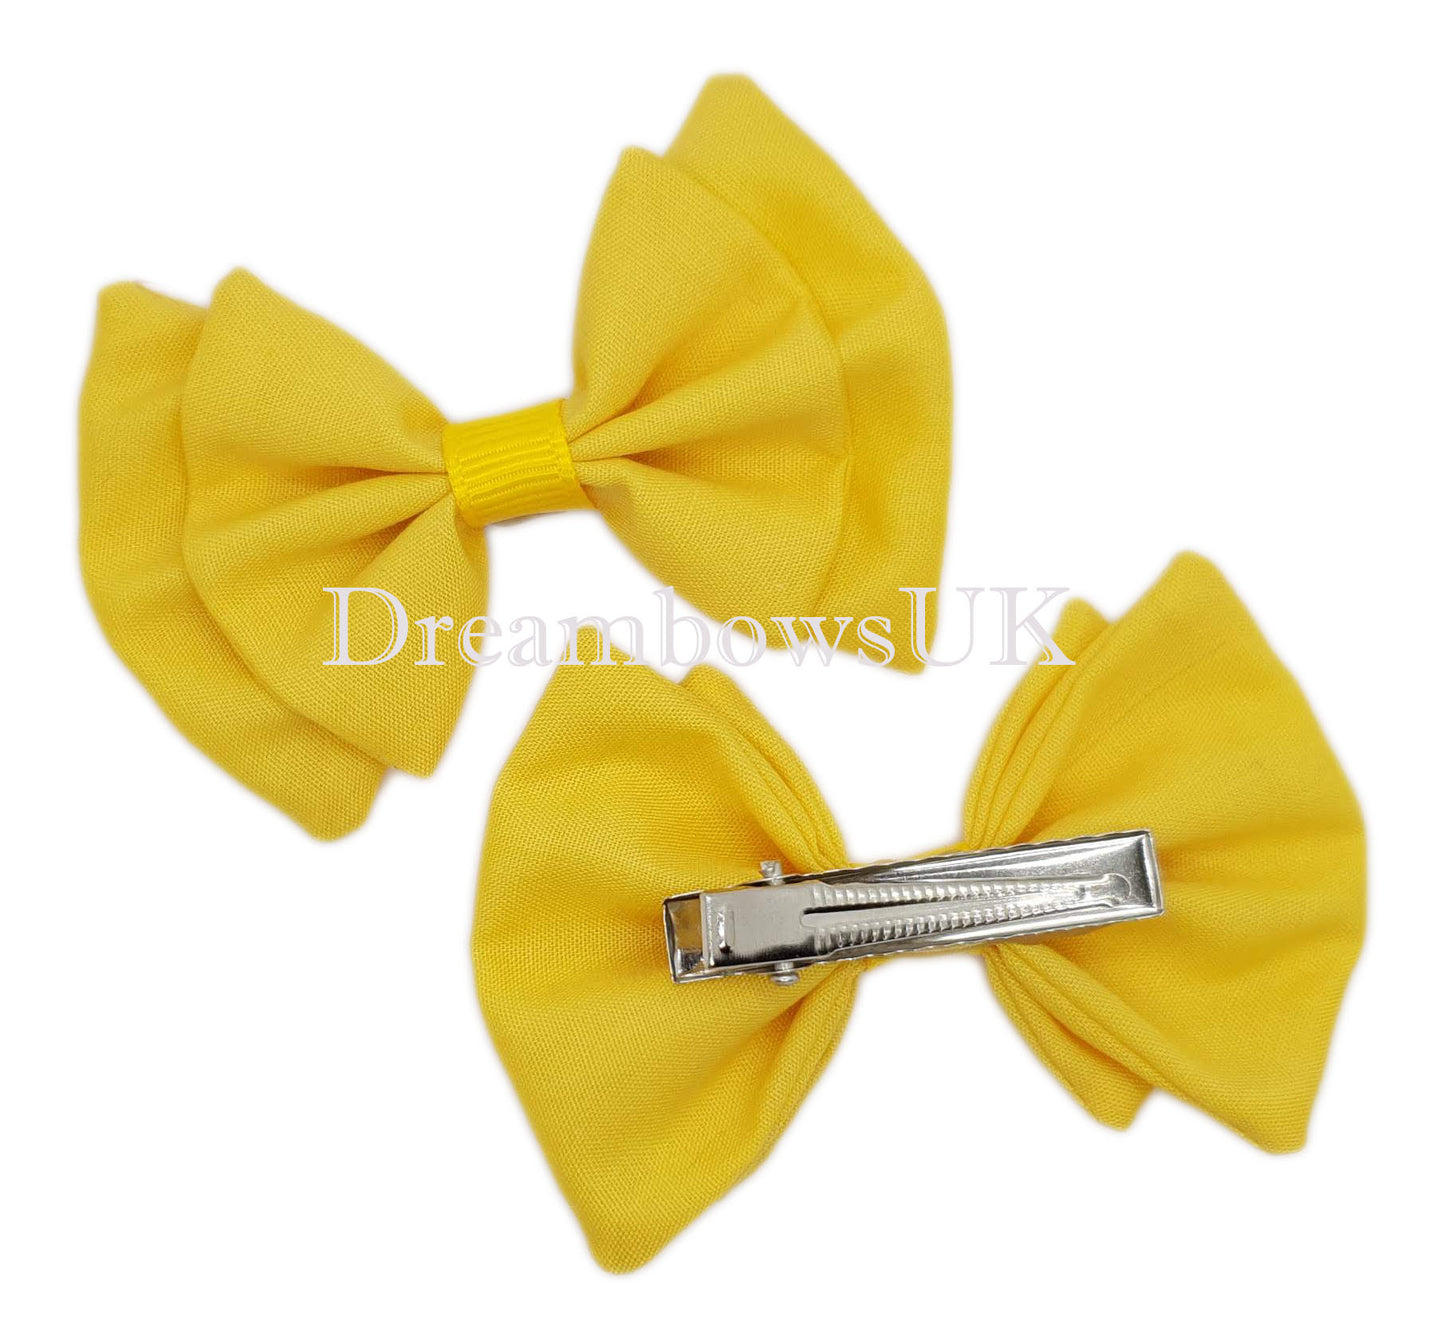 golden yellow hair bows on alligator clips